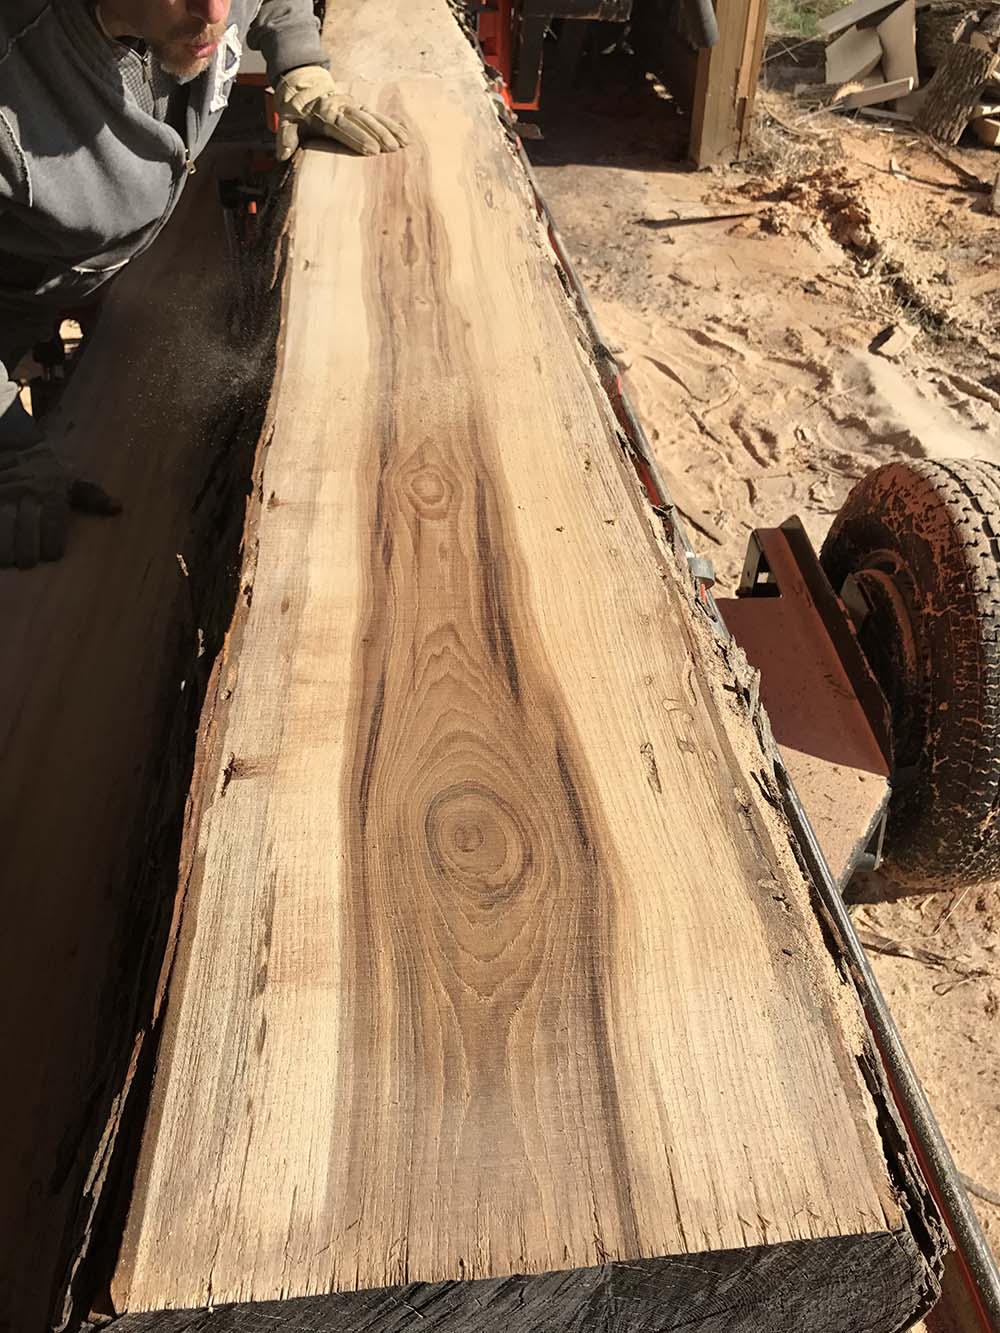 Live Edge Hickory Wood for Sale | Hickory Wood Slabs for ...